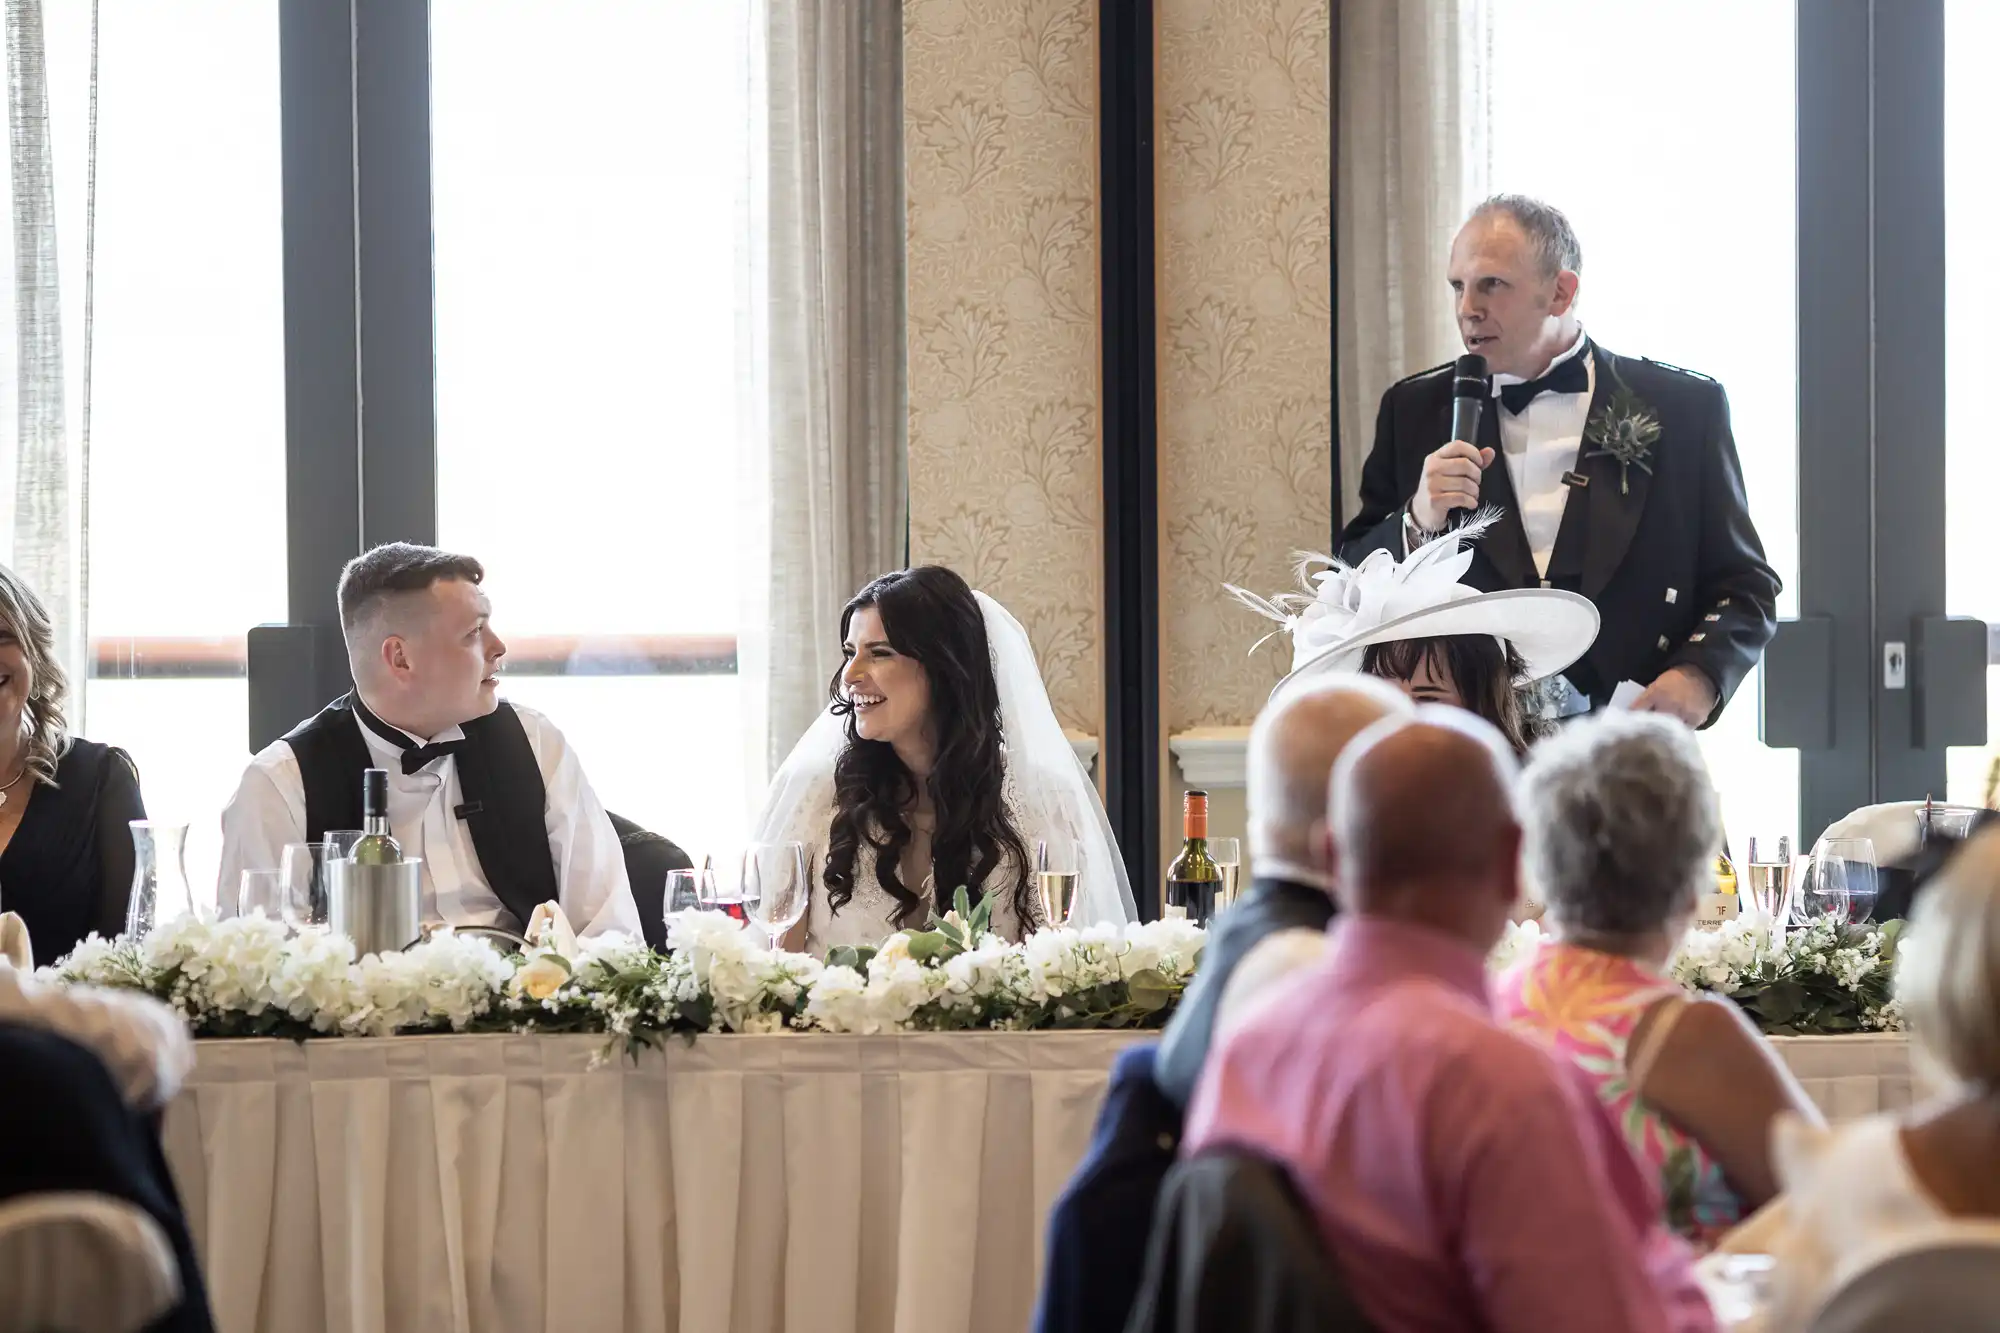 A man delivers a speech at a wedding reception, holding a microphone, with a smiling bride and groom seated at the head table, surrounded by guests and floral decorations.